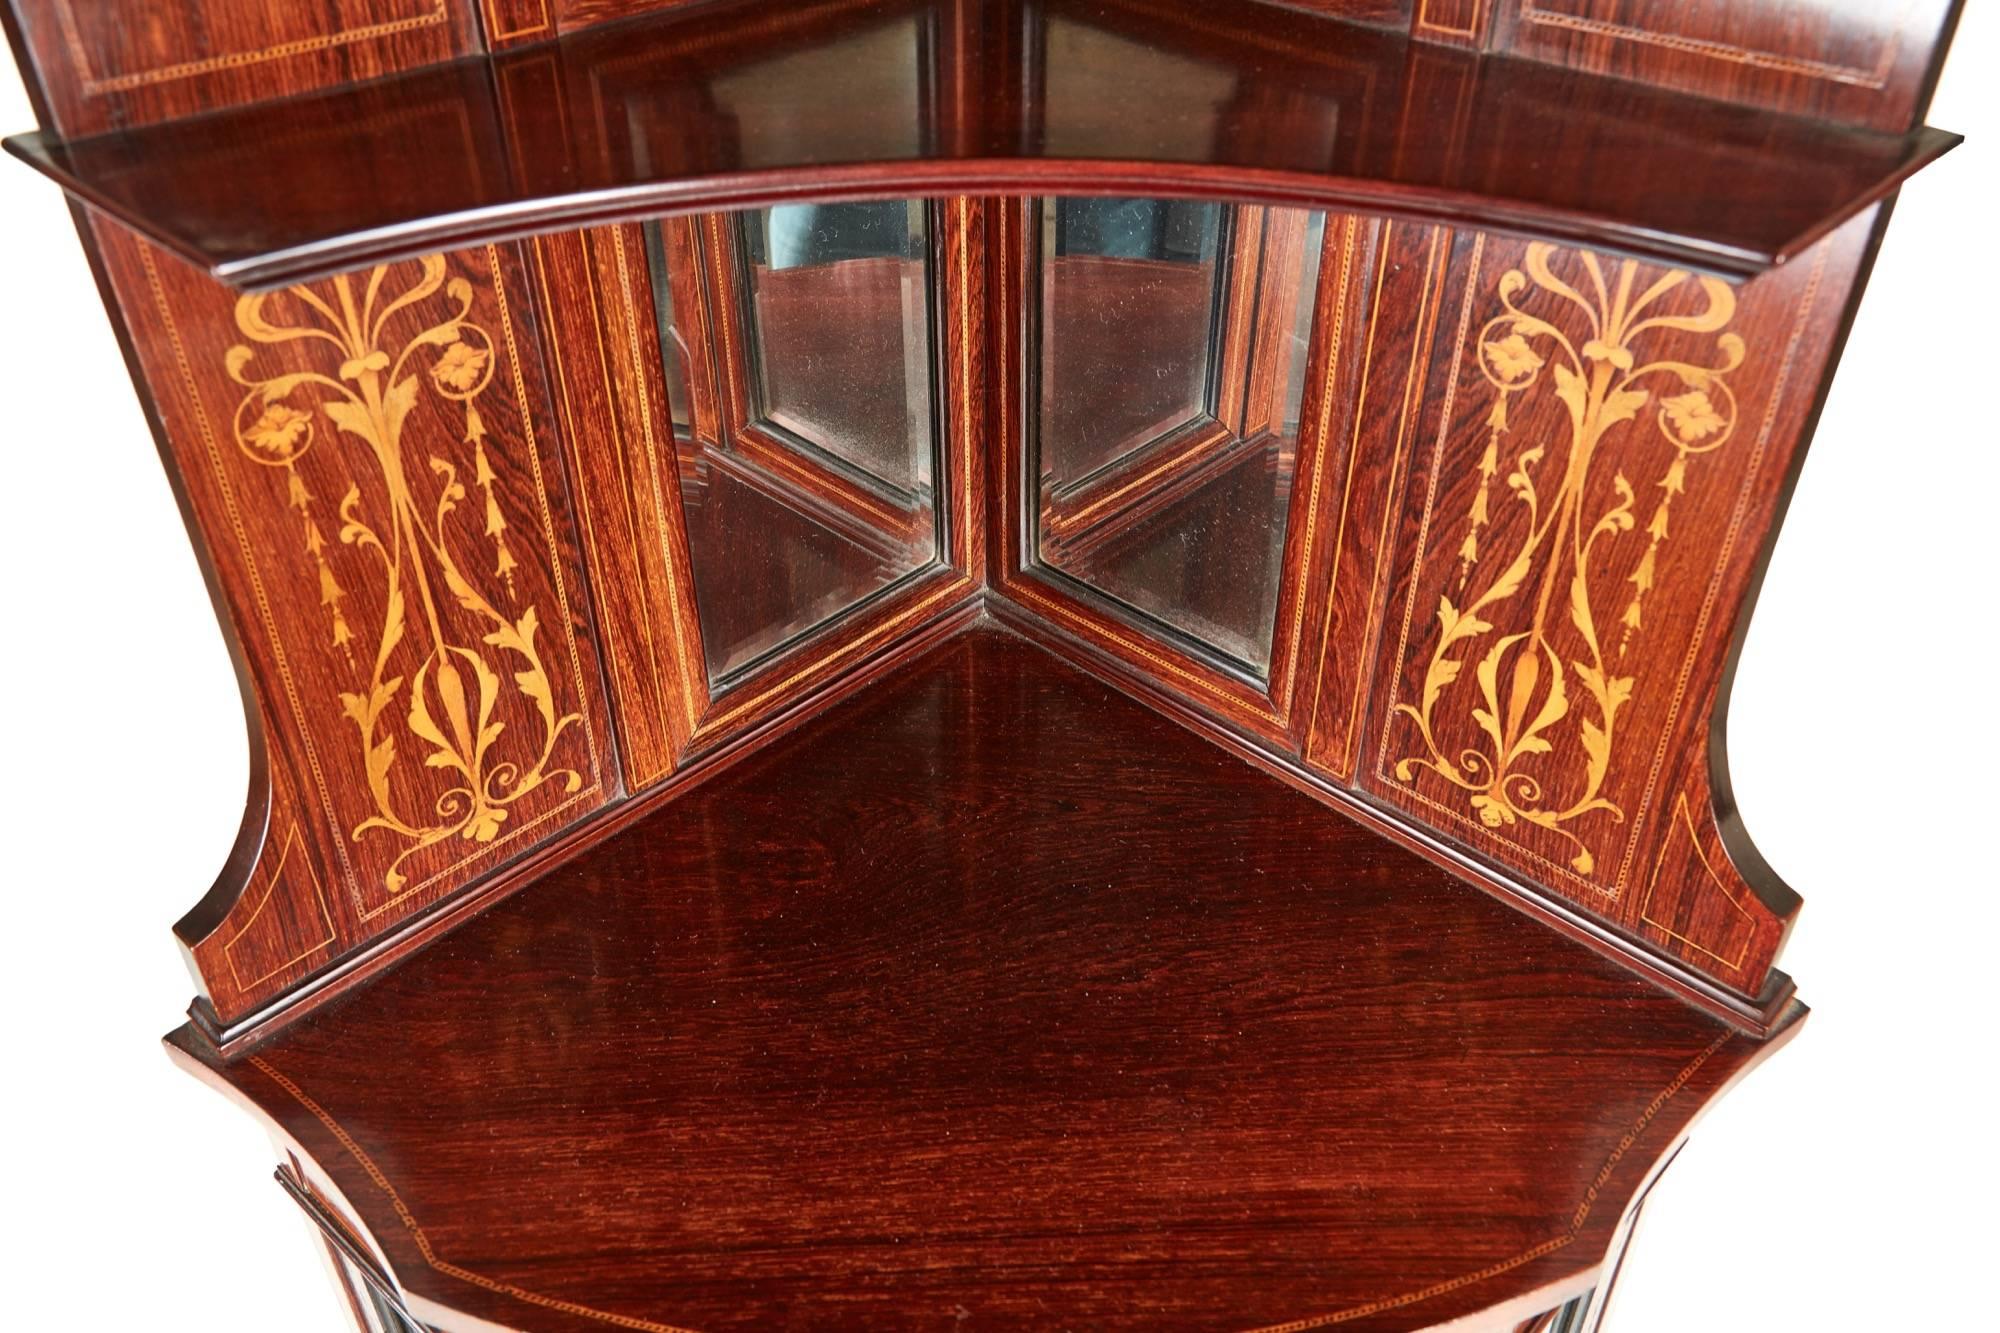 Outstanding rosewood inlaid corner cabinet, the top with six bevel edged mirrors, marquetry inlaid satinwood panels, the bowfront base with a glazed centre door, marquetry inlaid satinwood frieze, supported by tapered legs with spade feet united by